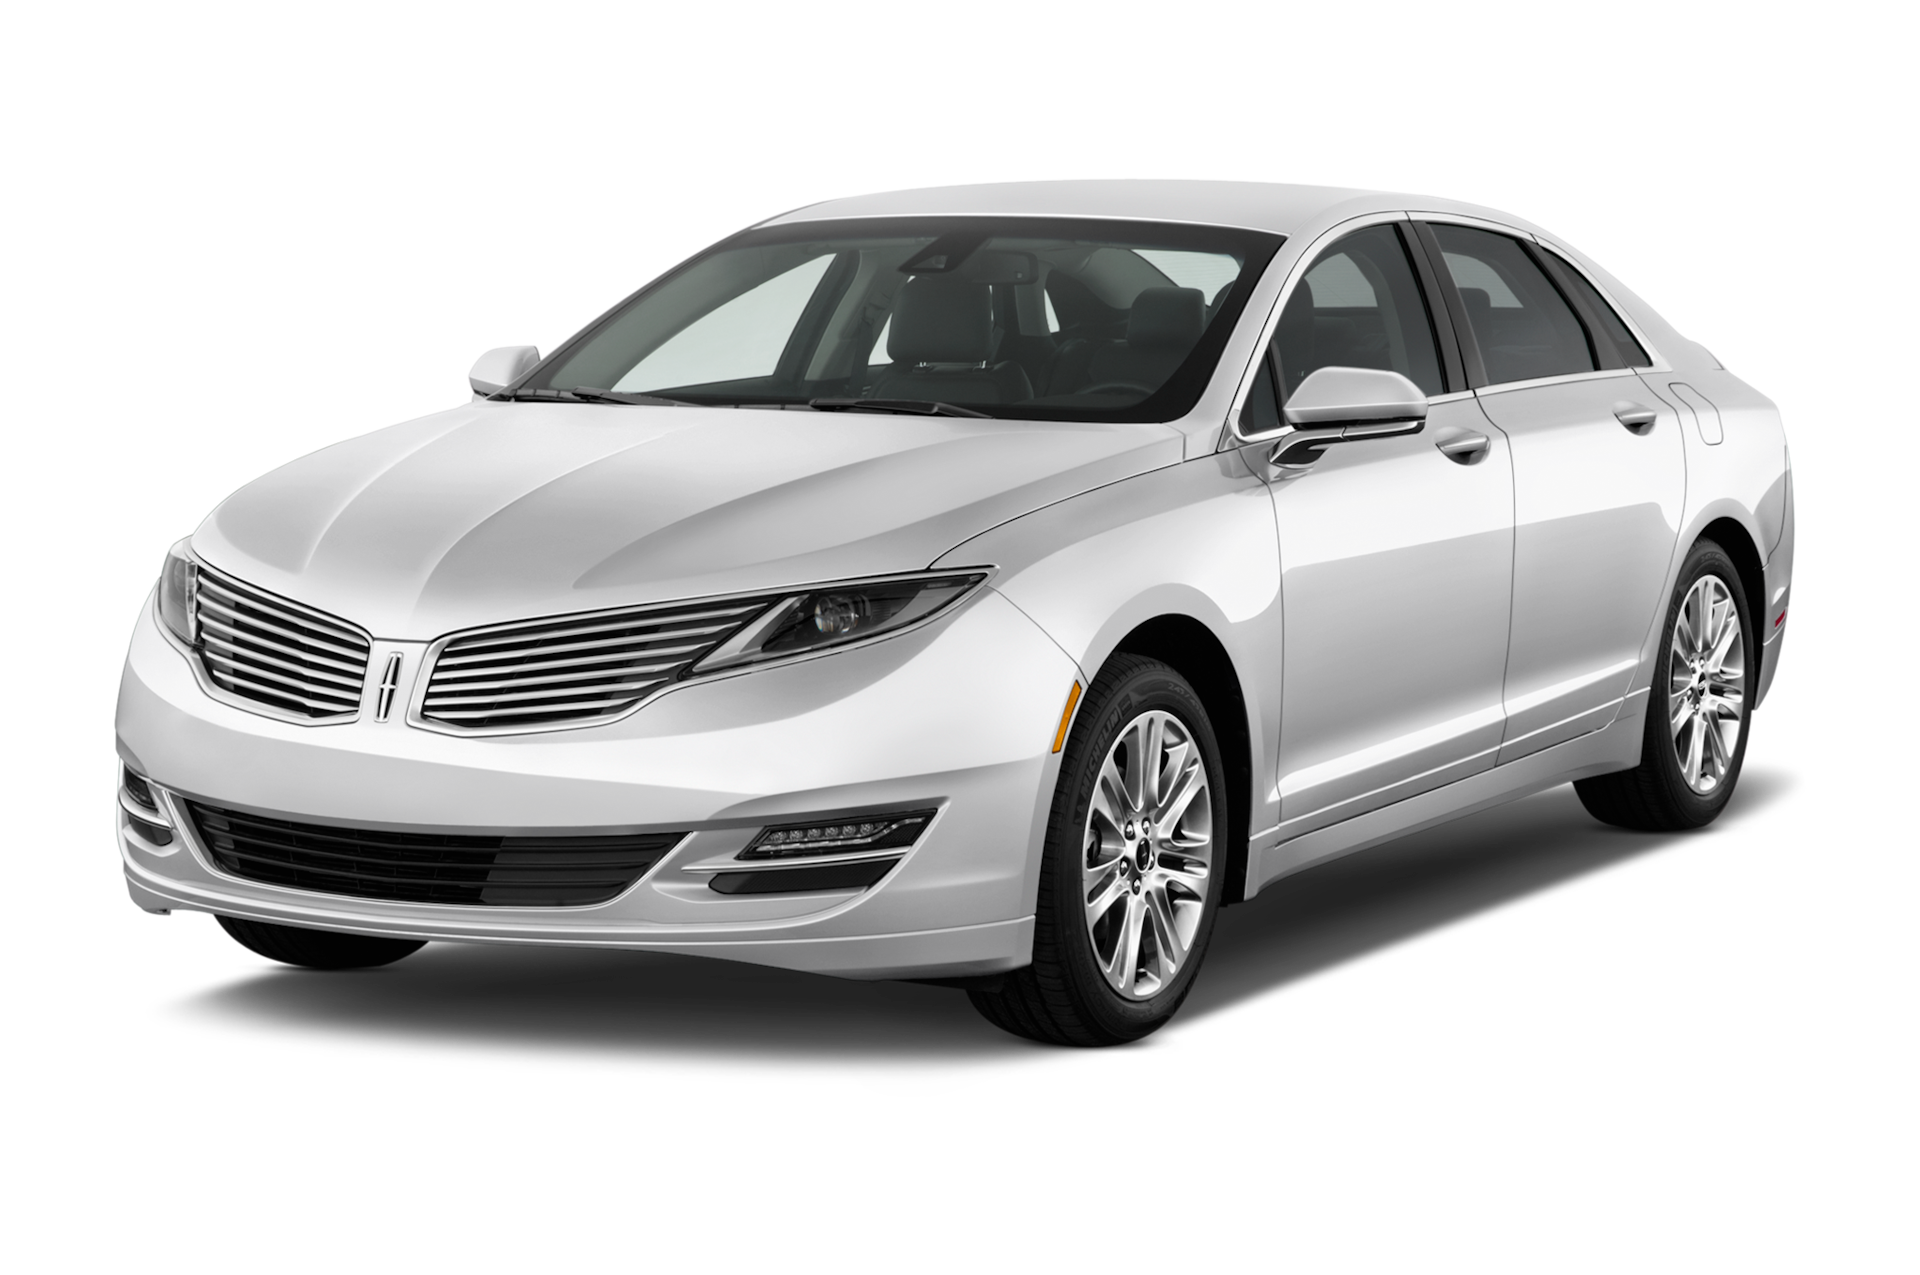 2015 Lincoln MKZ Prices, Reviews, and Photos - MotorTrend